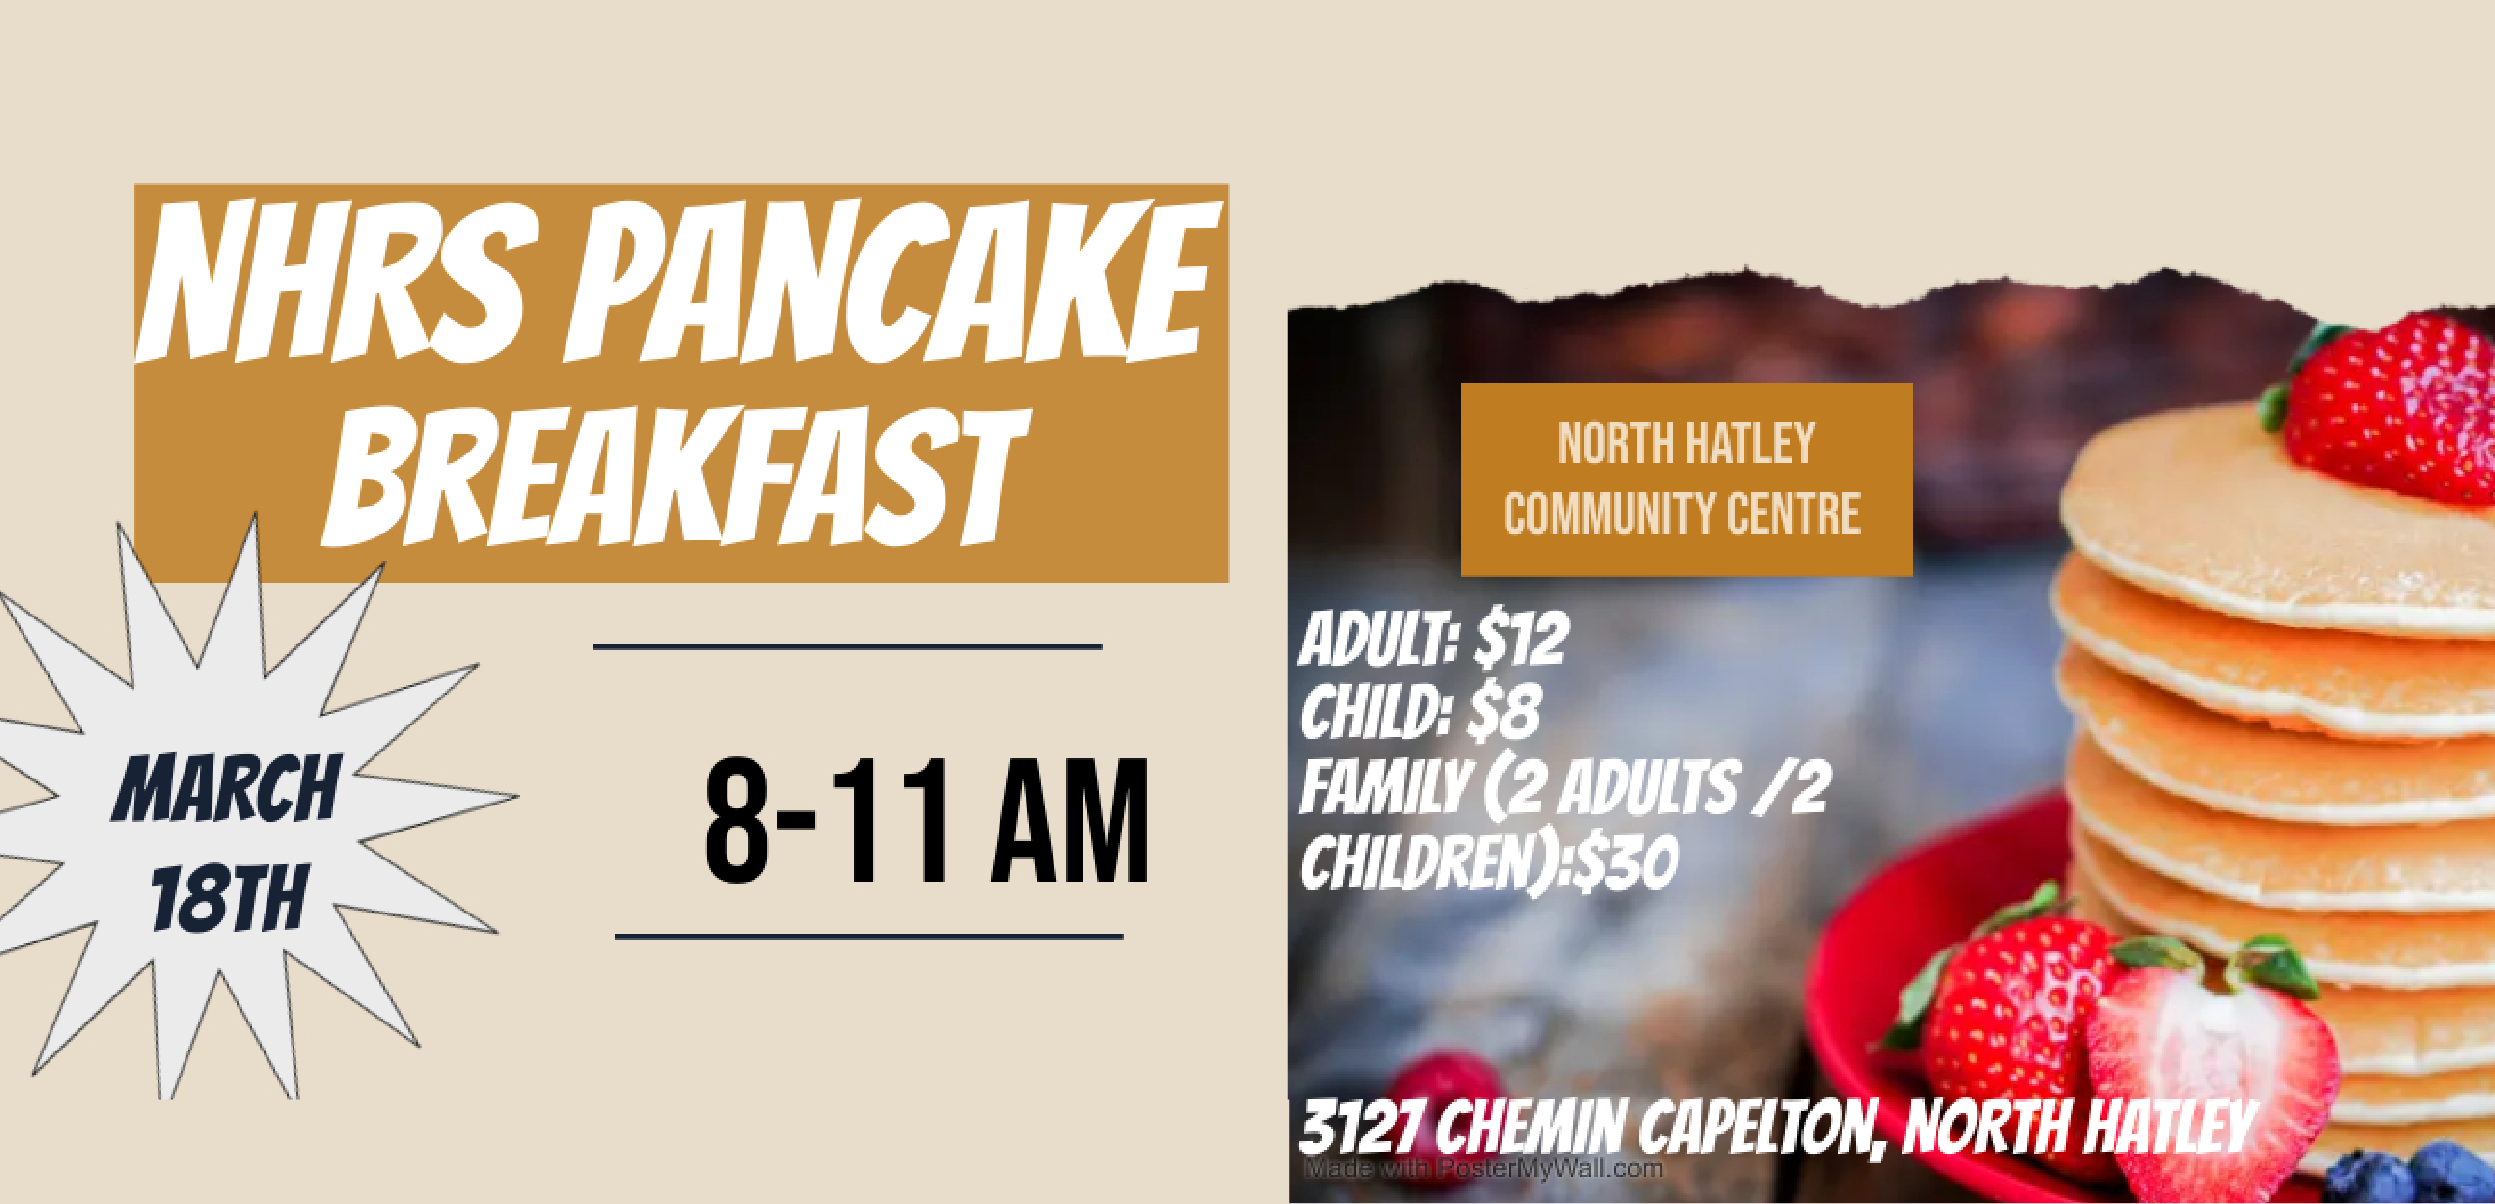 You are currently viewing NHRS Pancake breakfast invitation